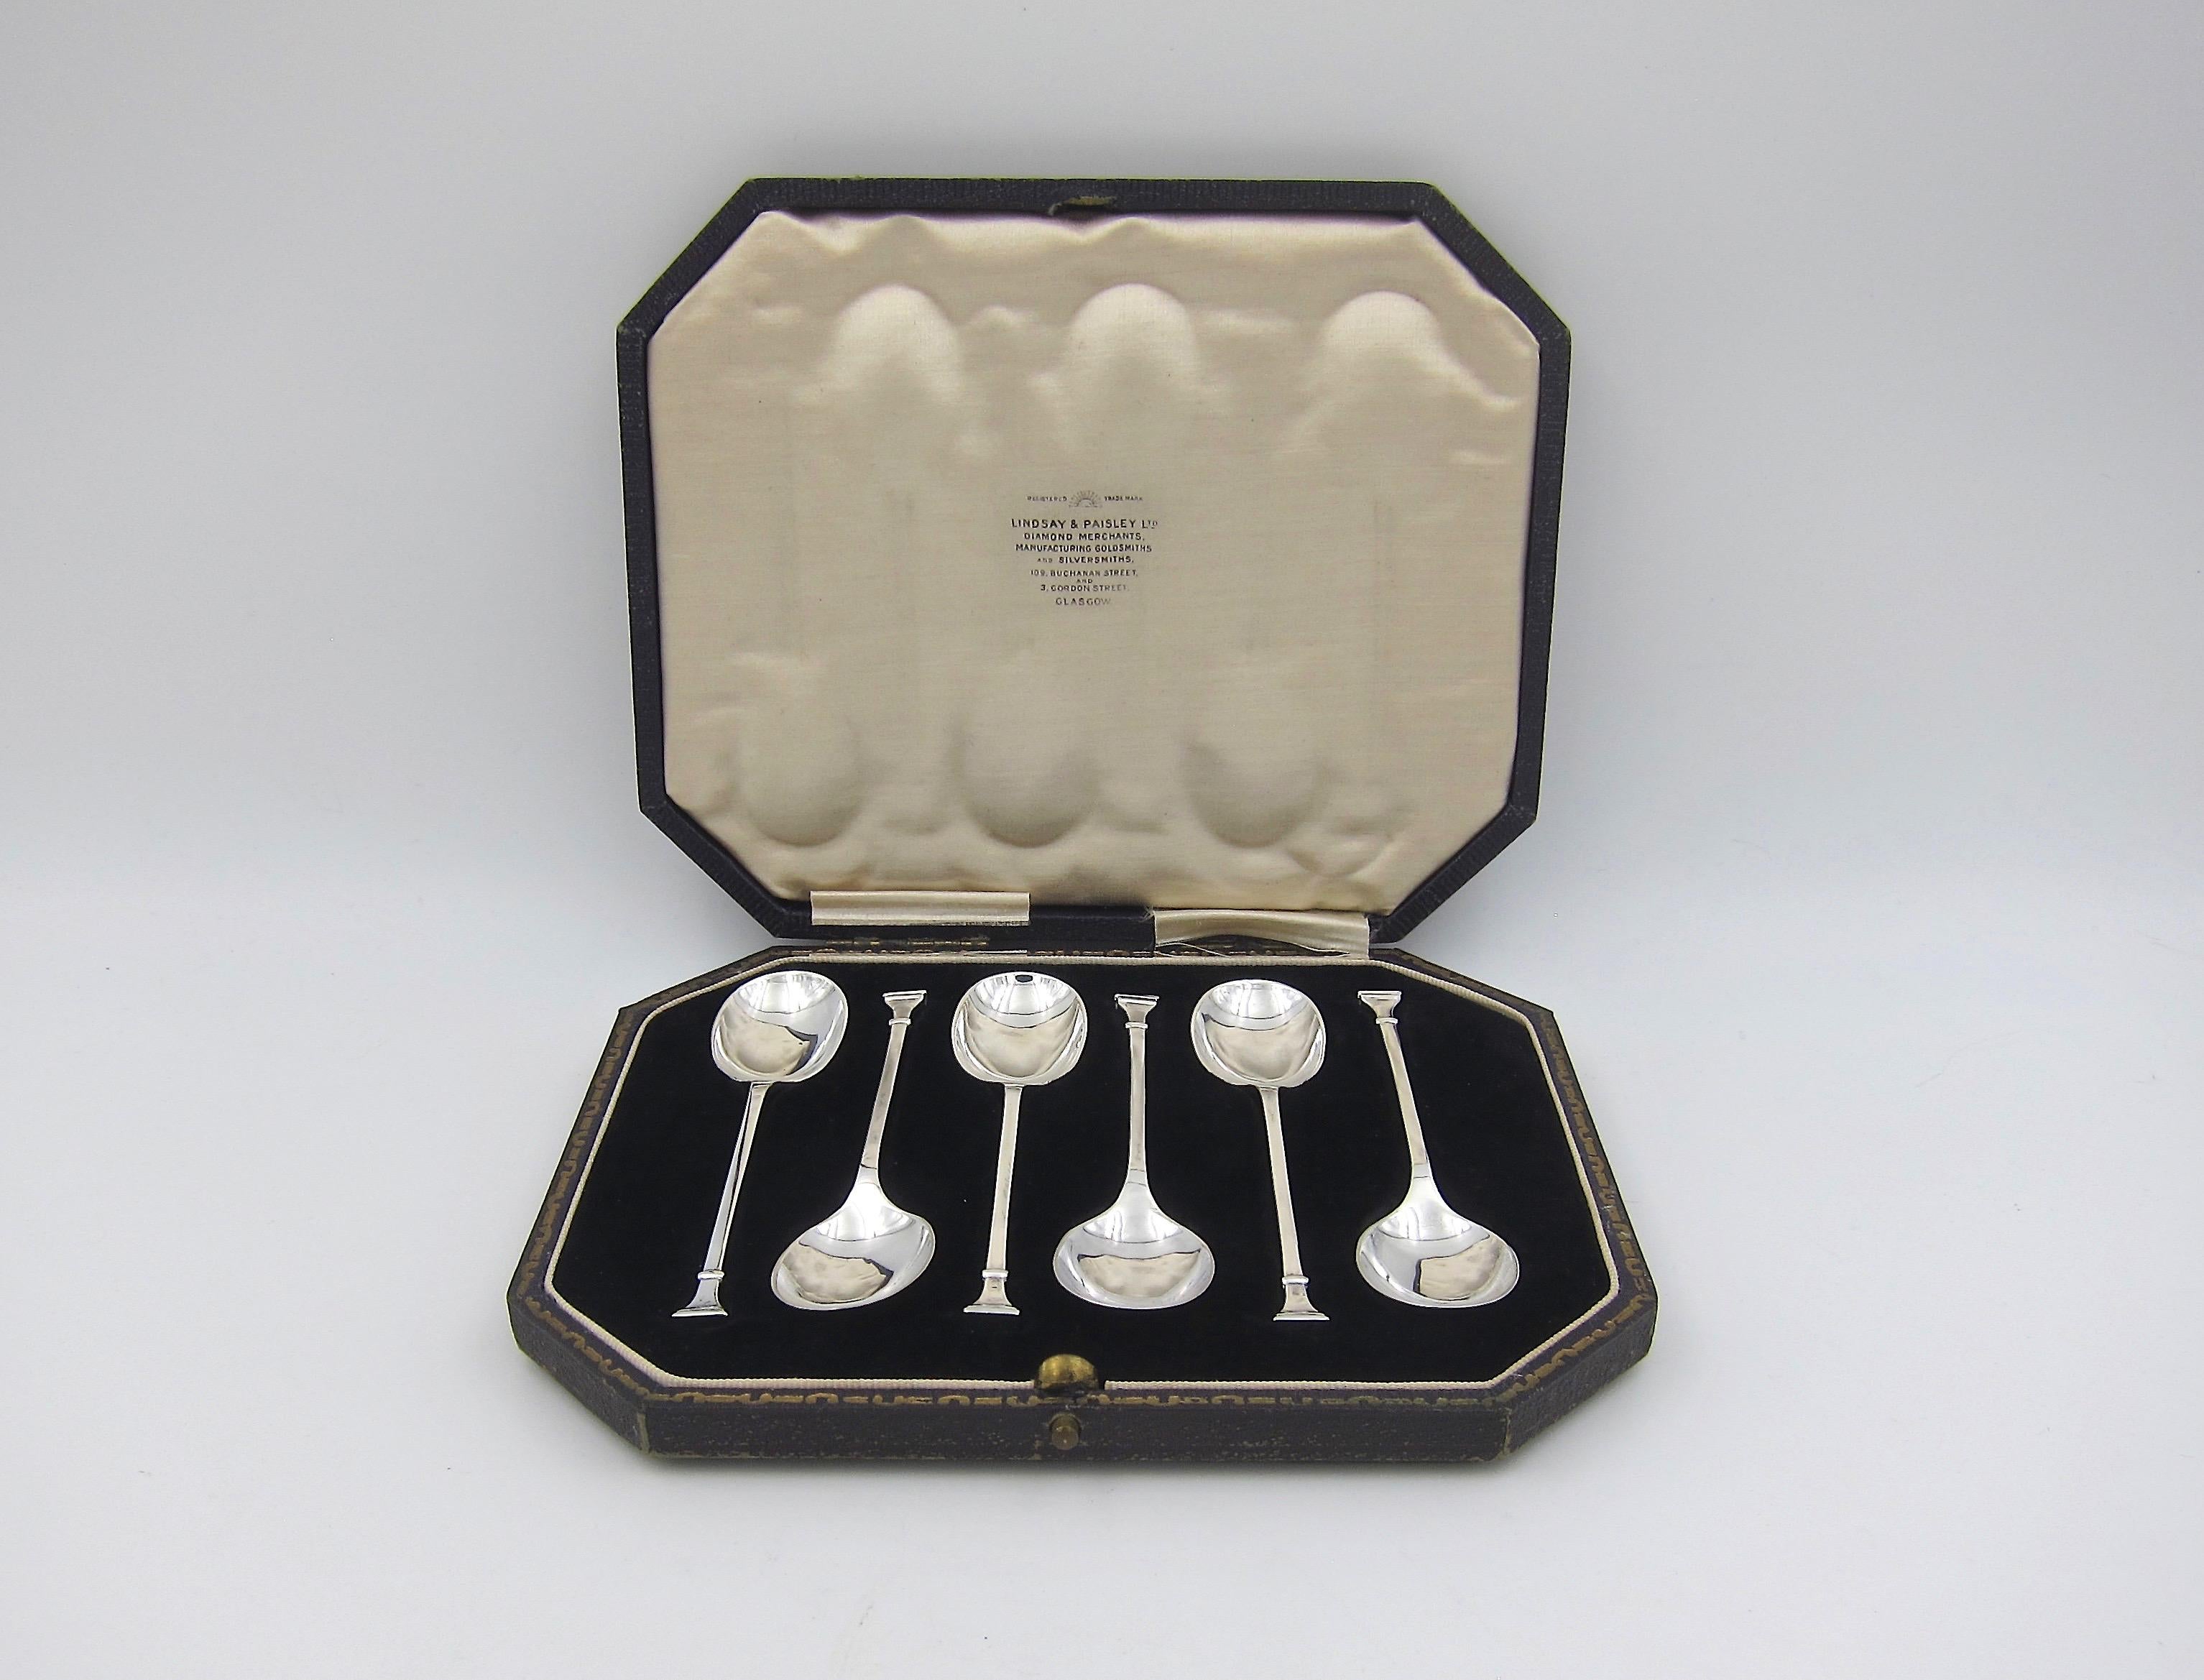 A handsome boxed set of six sterling silver coffee spoons made by Cooper Brothers and Sons of Sheffield, England in 1925. The vintage silver spoons include their original fitted box from Lindsay & Paisley LTD of Glasgow. 

Each solid silver handle